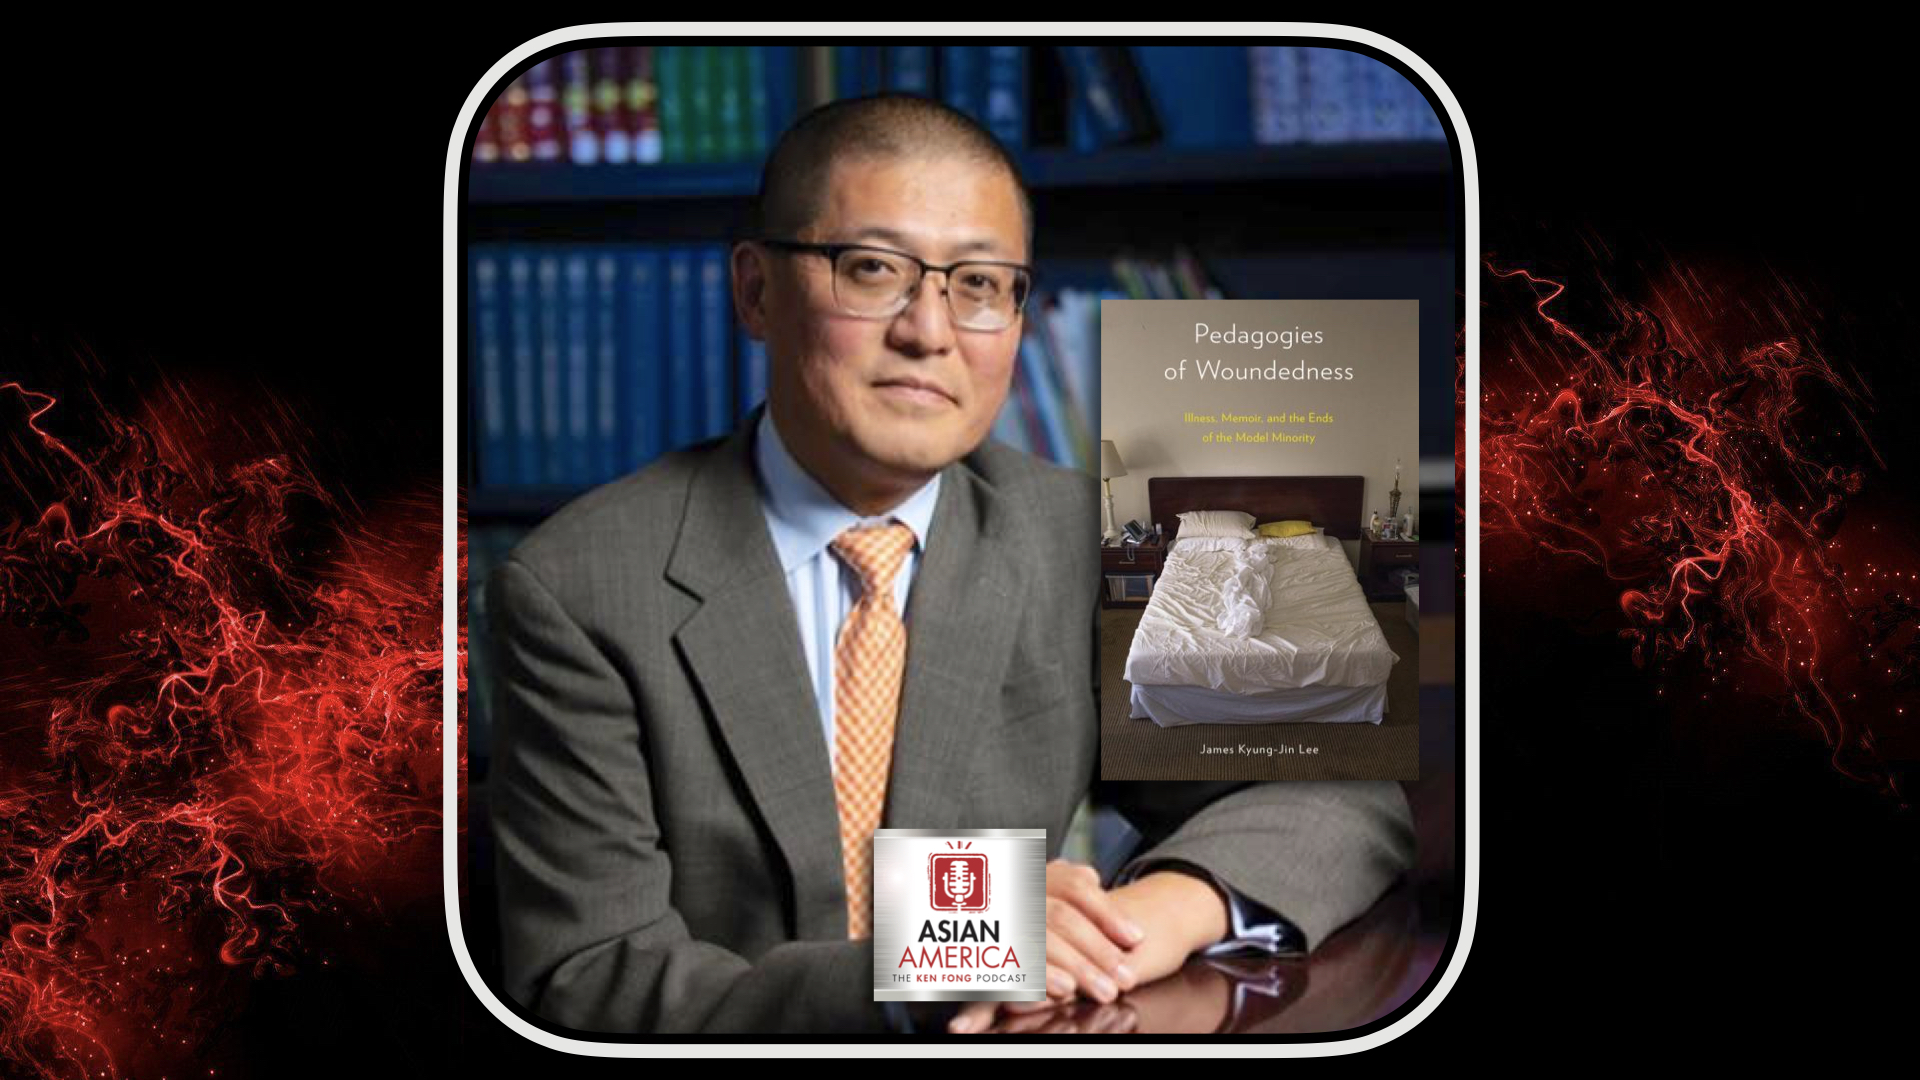 Ep 415: The Rev. Dr. James Kyung-Jin Lee On The Pedagogies of Woundedness